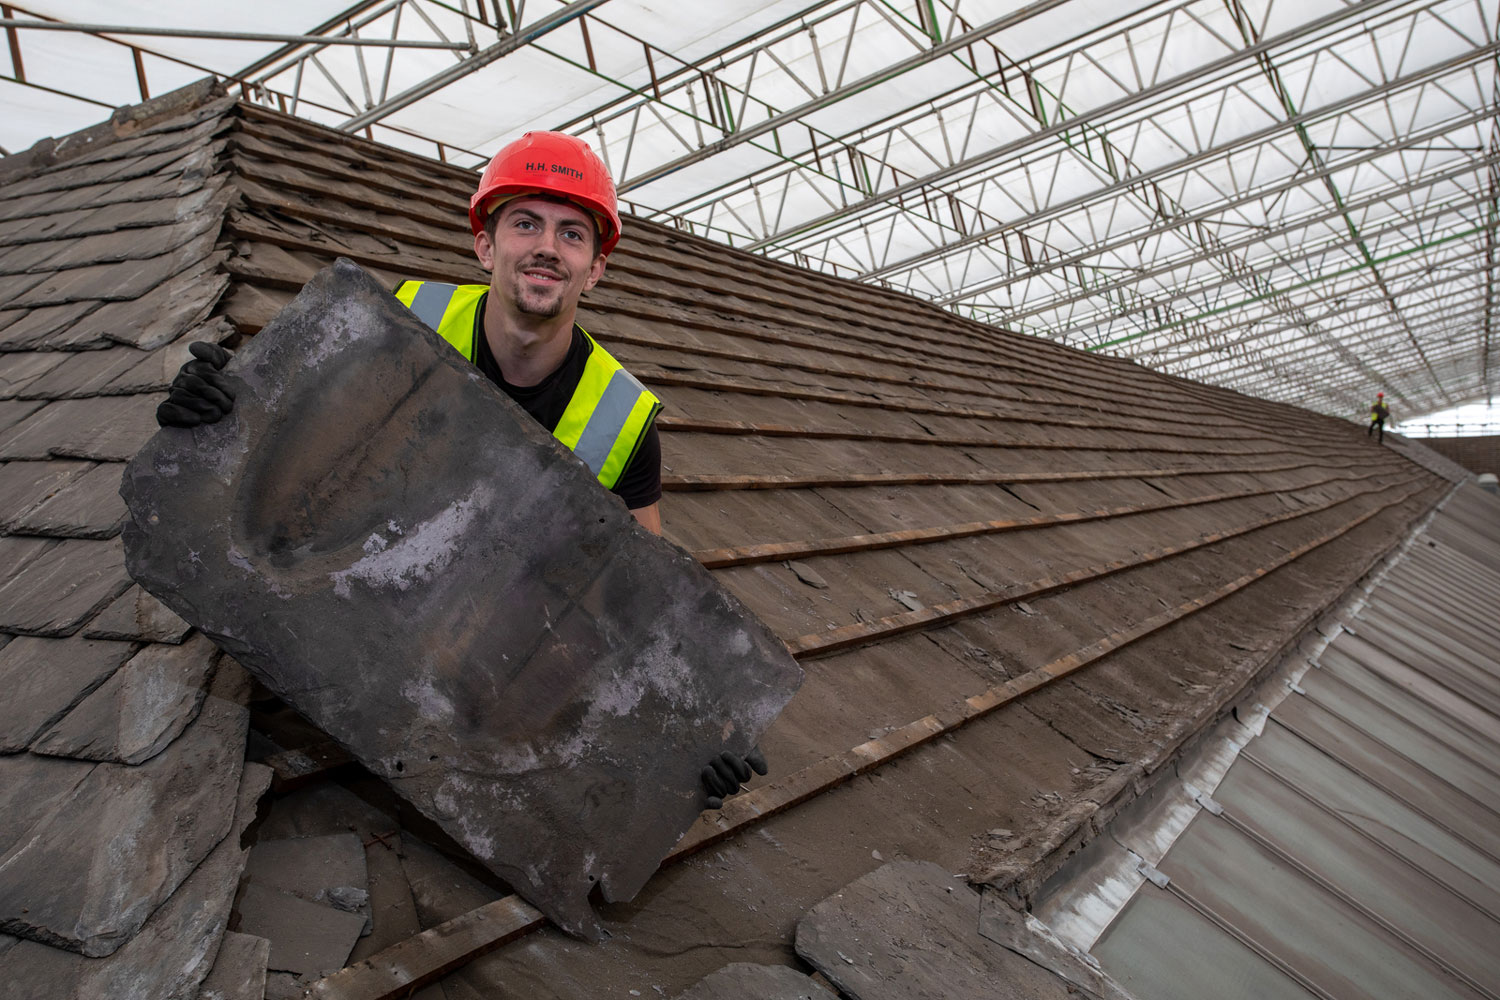 A man on a roof wearing a high-vis jacket and hard hat, holding a large slate roof tile